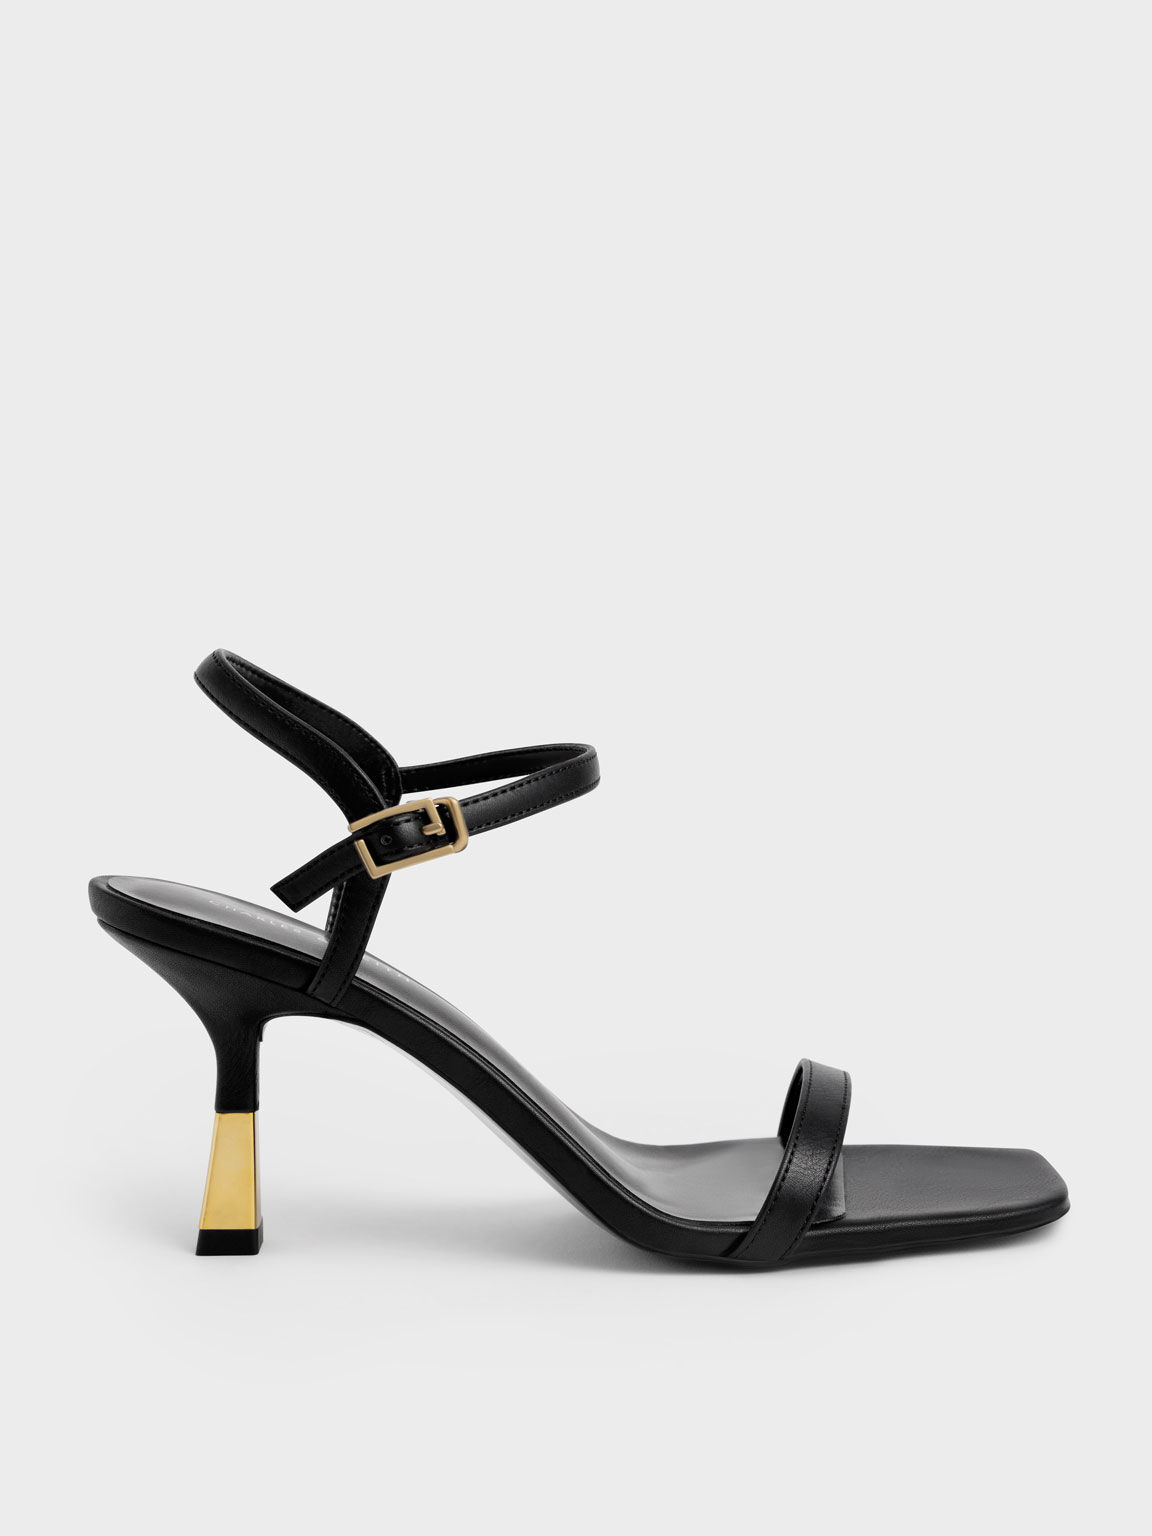 CHARLES & KEITH - Shop now: Textured Gem-Embellished Strappy Sandals -  https://s.charleskeith.com/3Pigy3b | Facebook